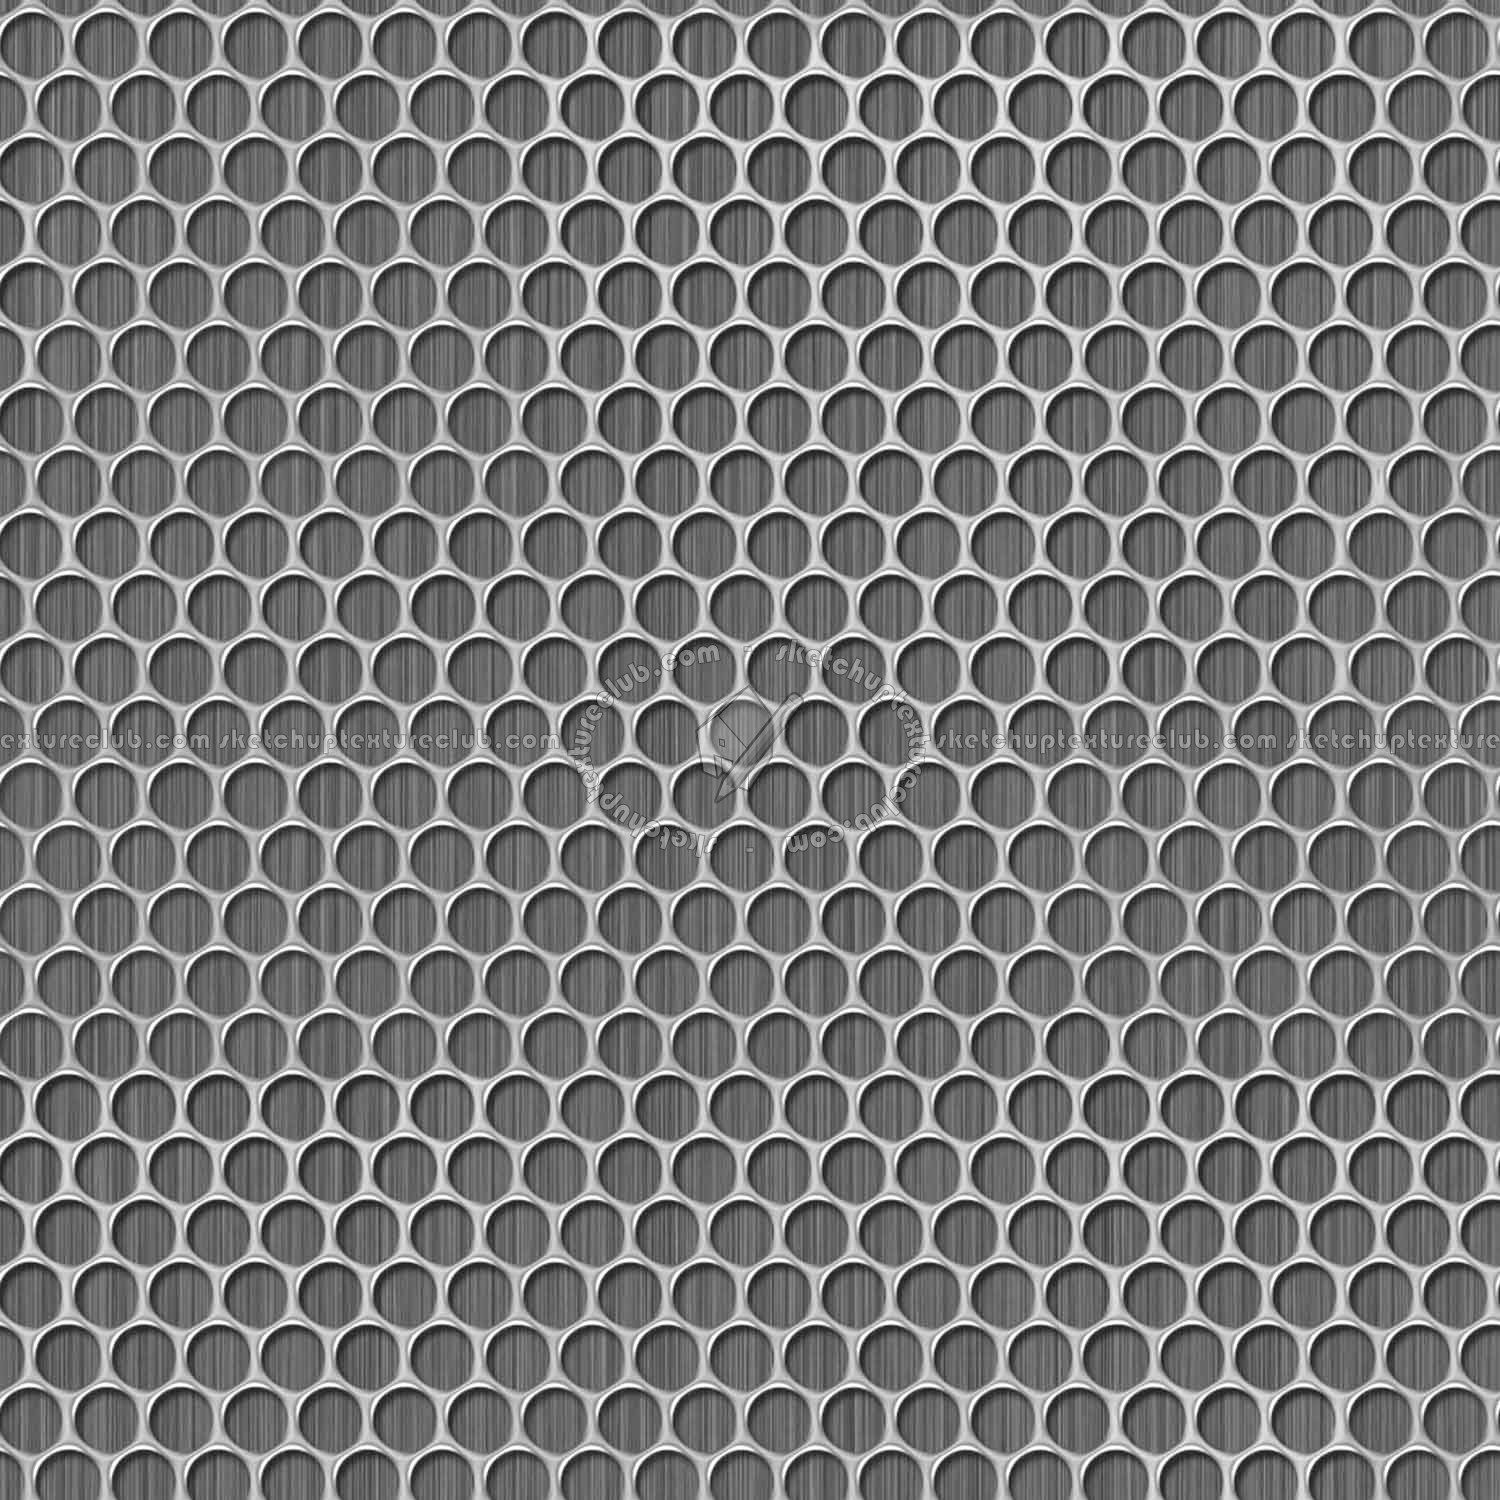 grille metal texture seamless 10523